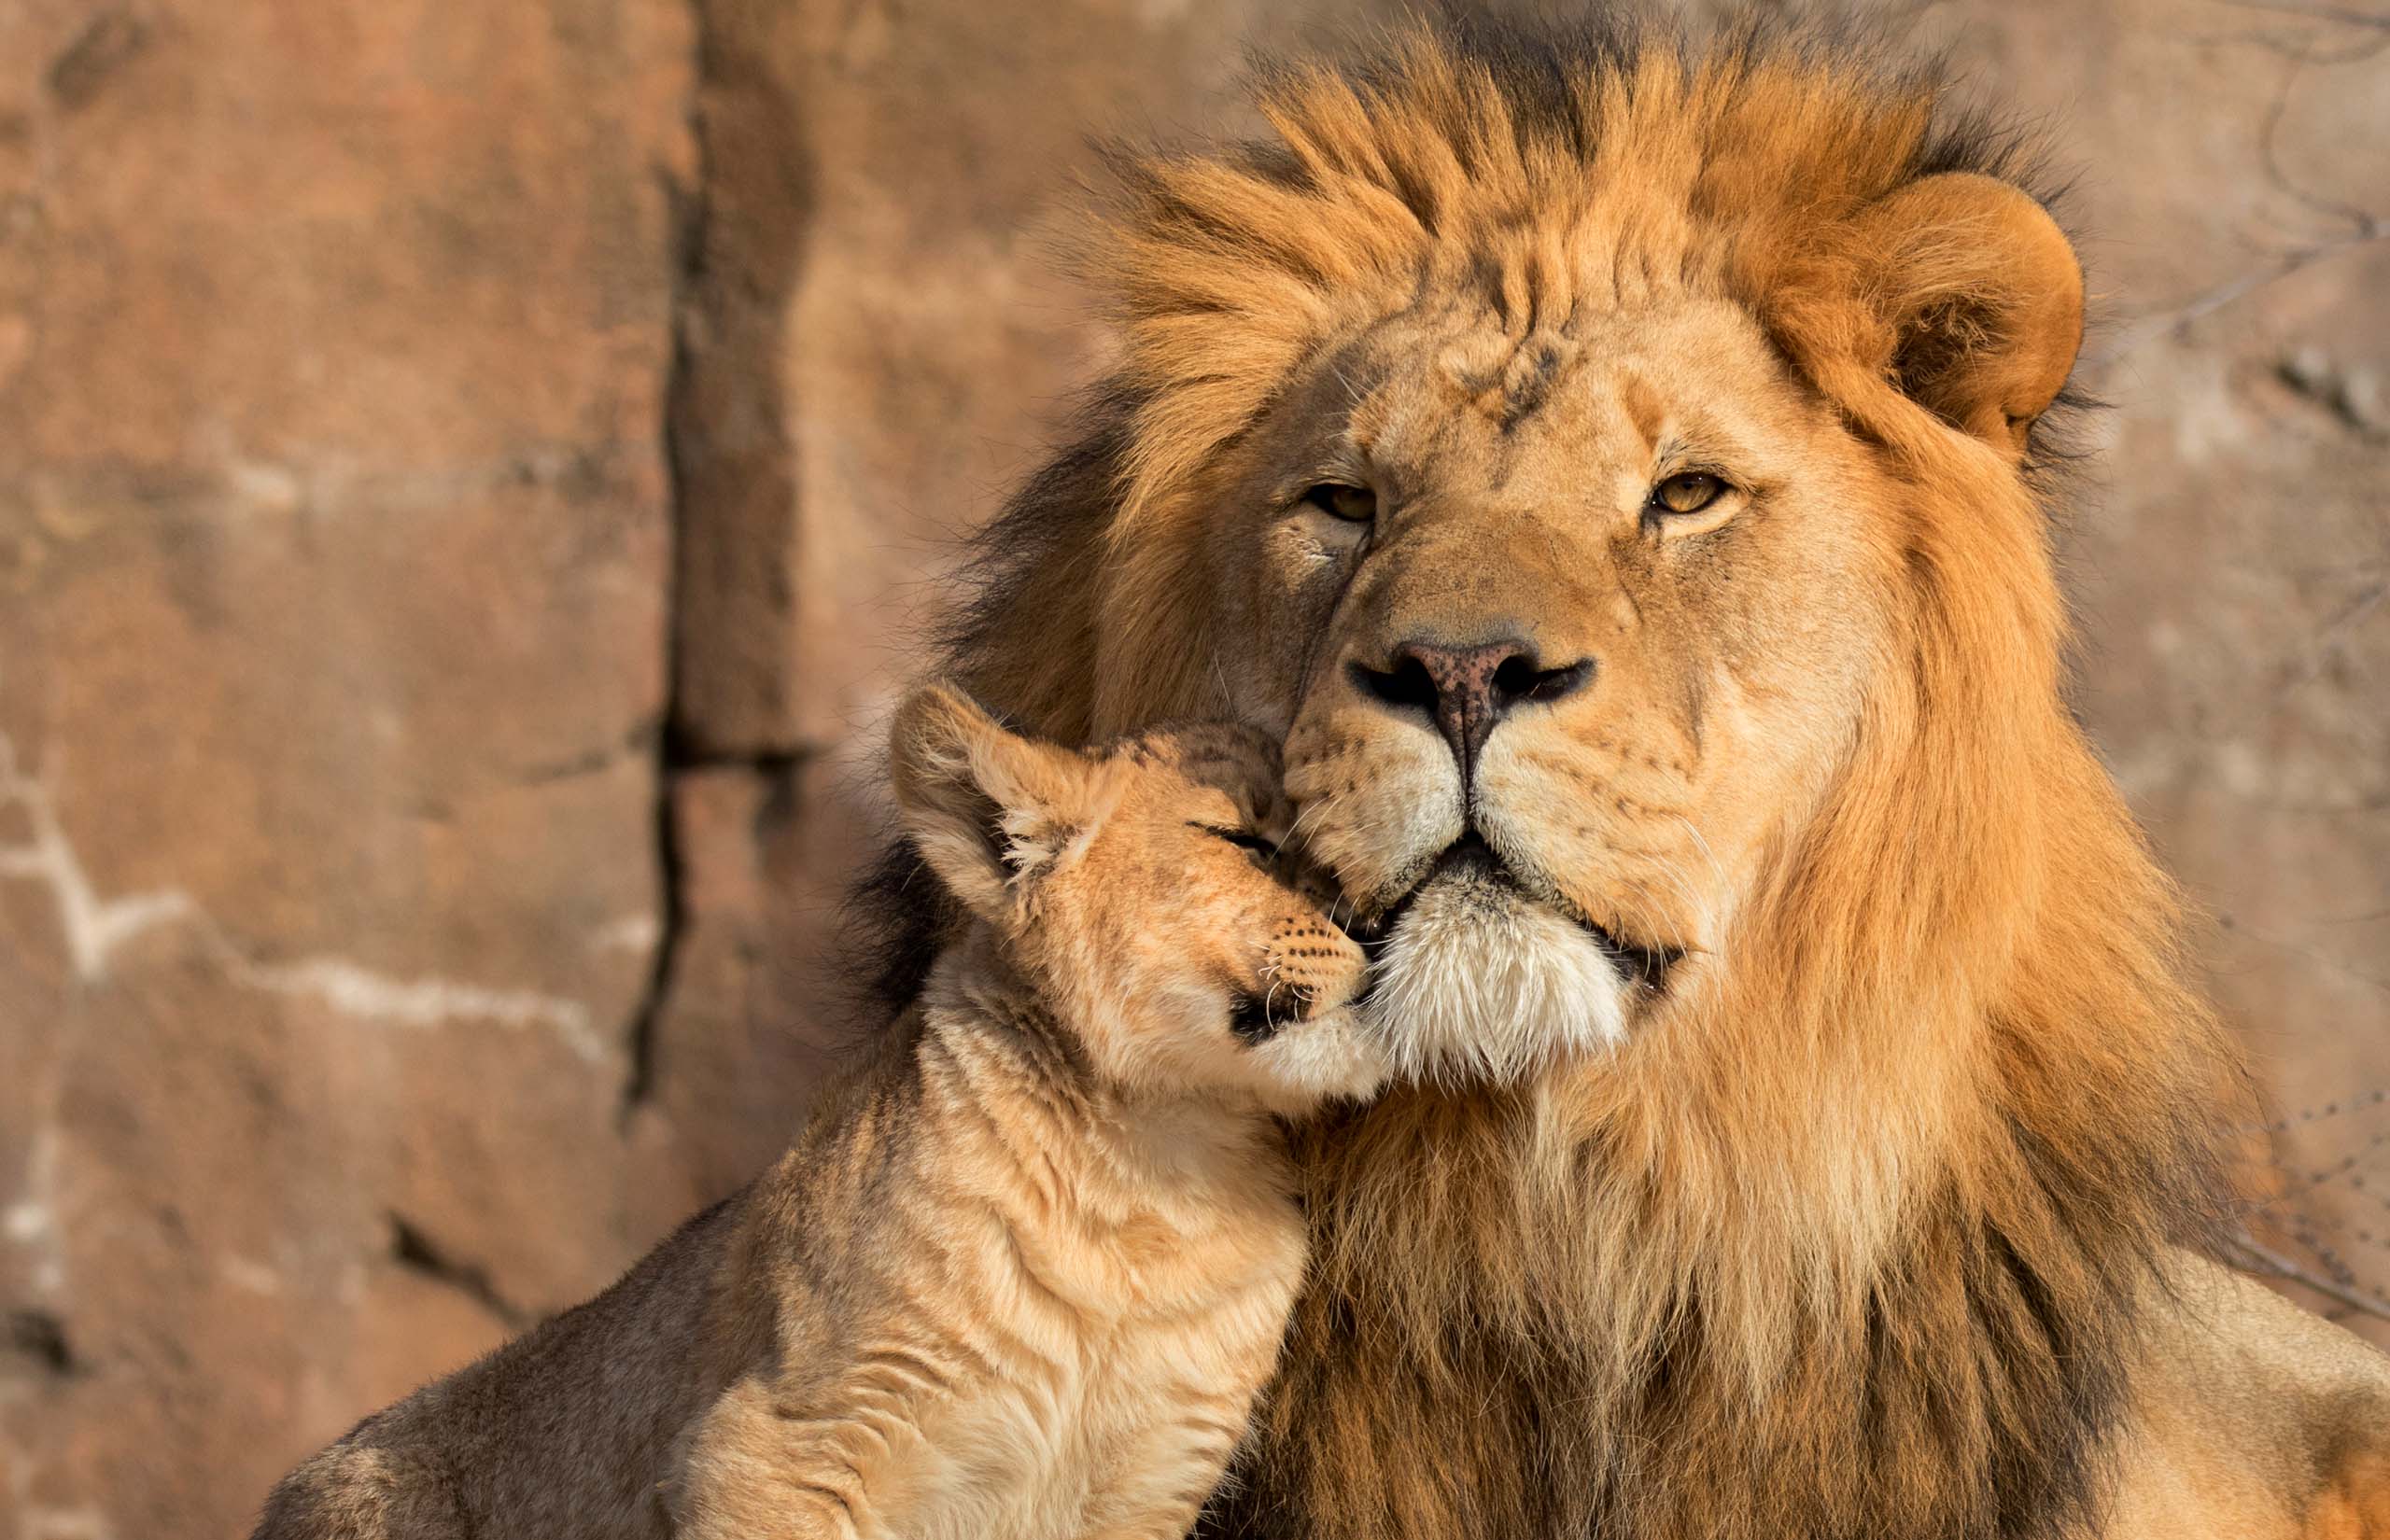 9 things you didn’t know about lions